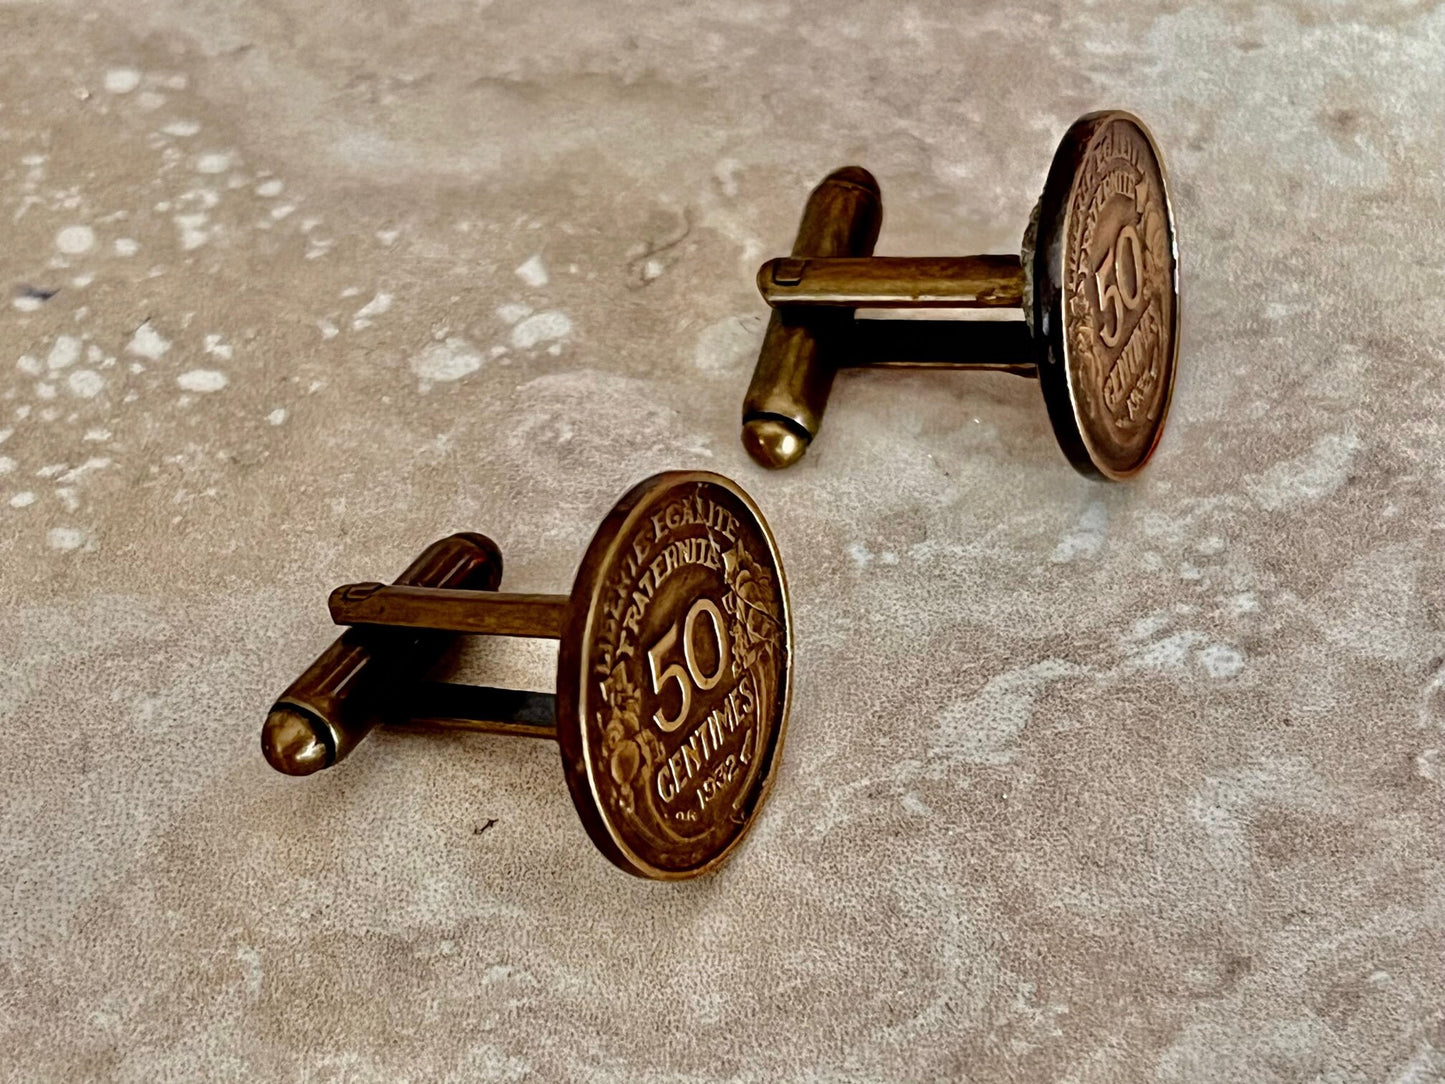 France Coin Cuff Links French 50 Centimes Liberty Equality Fraternity Custom Made Vintage and Rare coins - Cufflinks Coin Enthusiast